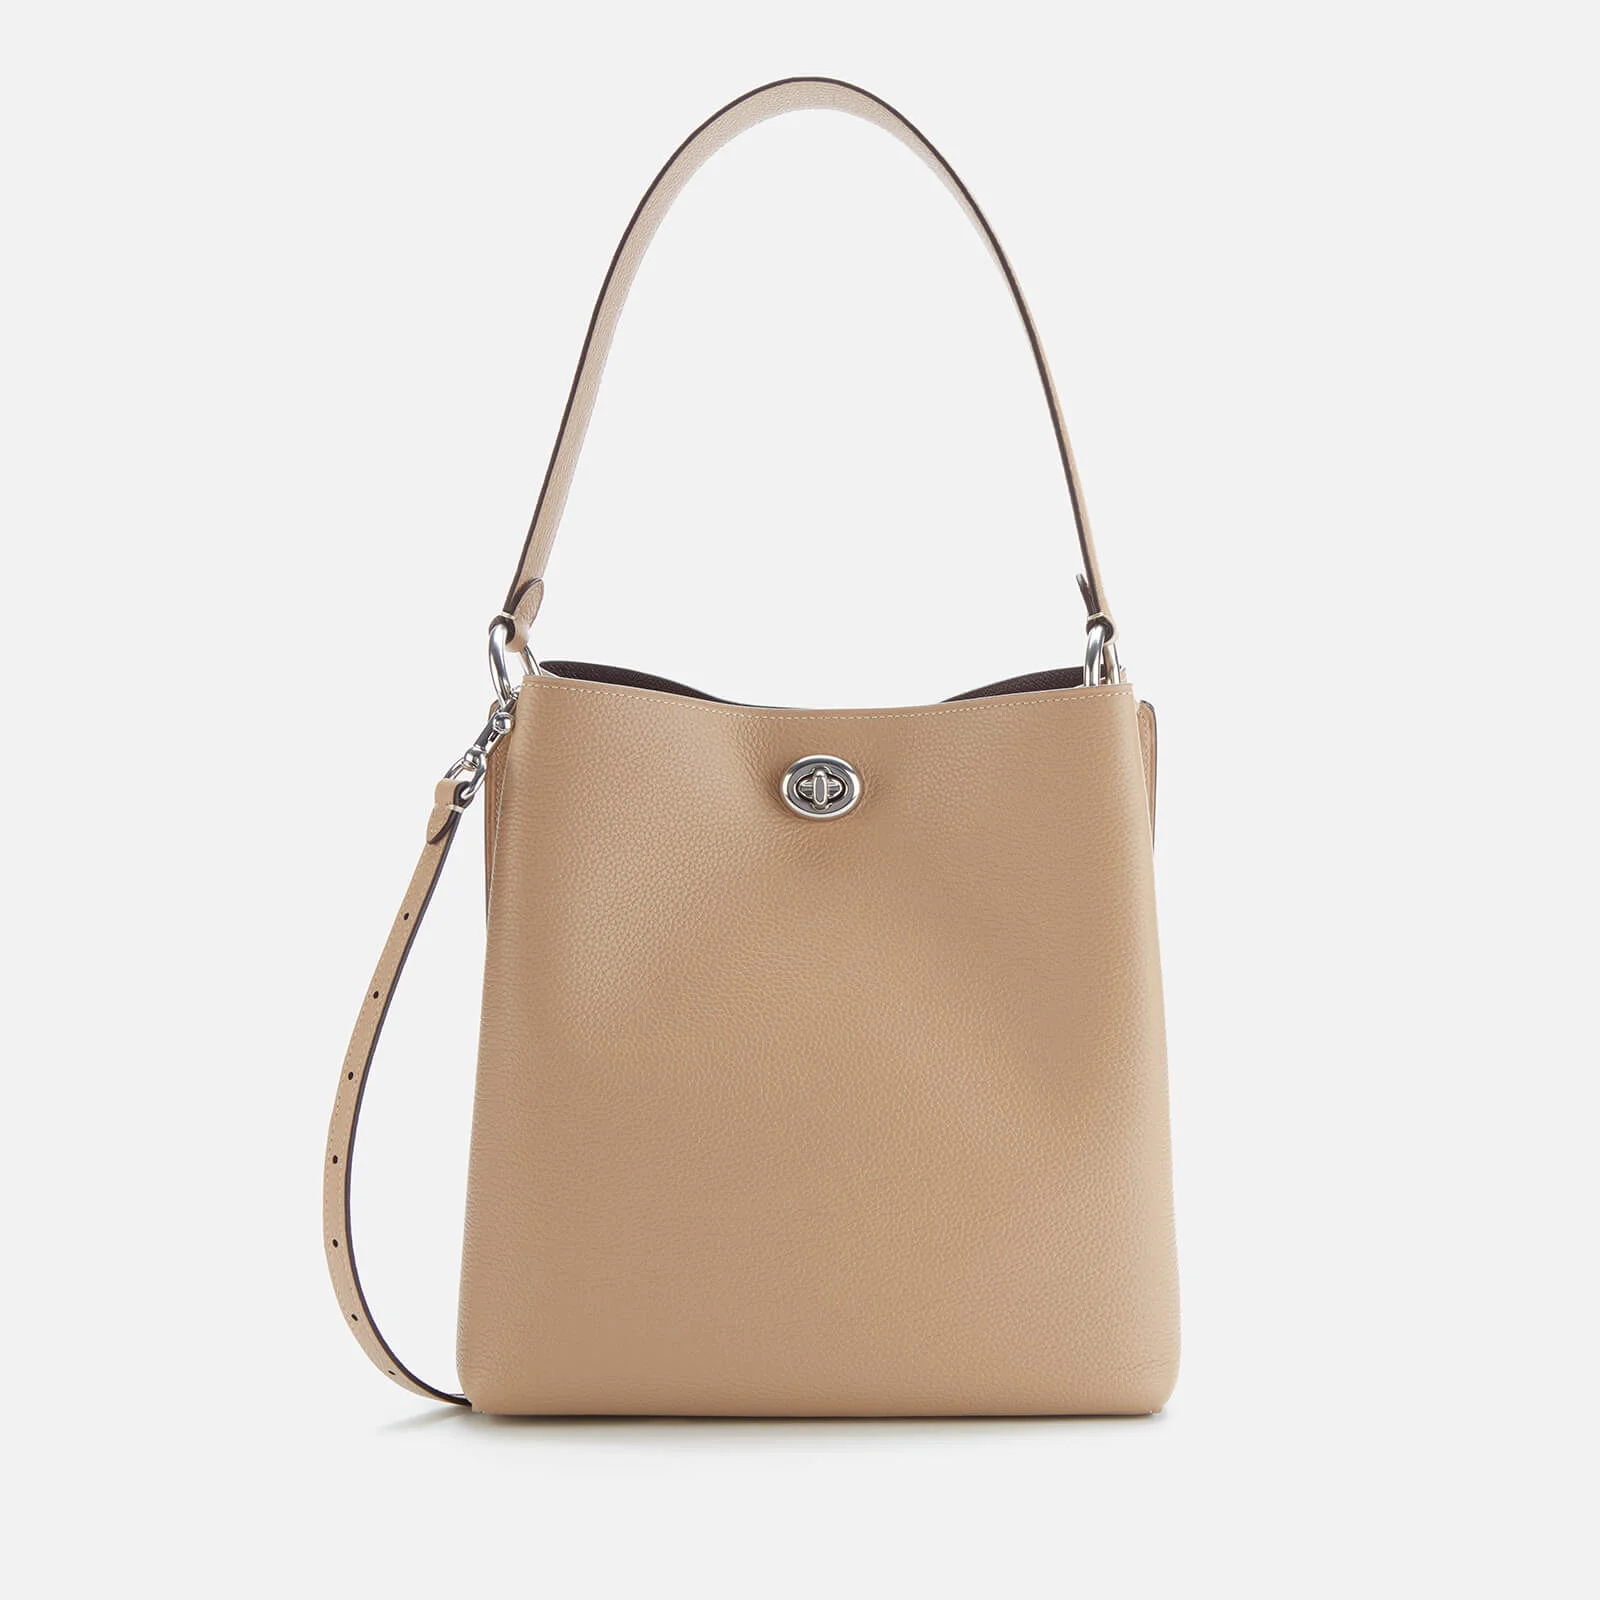 Coach Women's Polished Pebble Leather Charlie Bucket Bag - Taupe Image 1